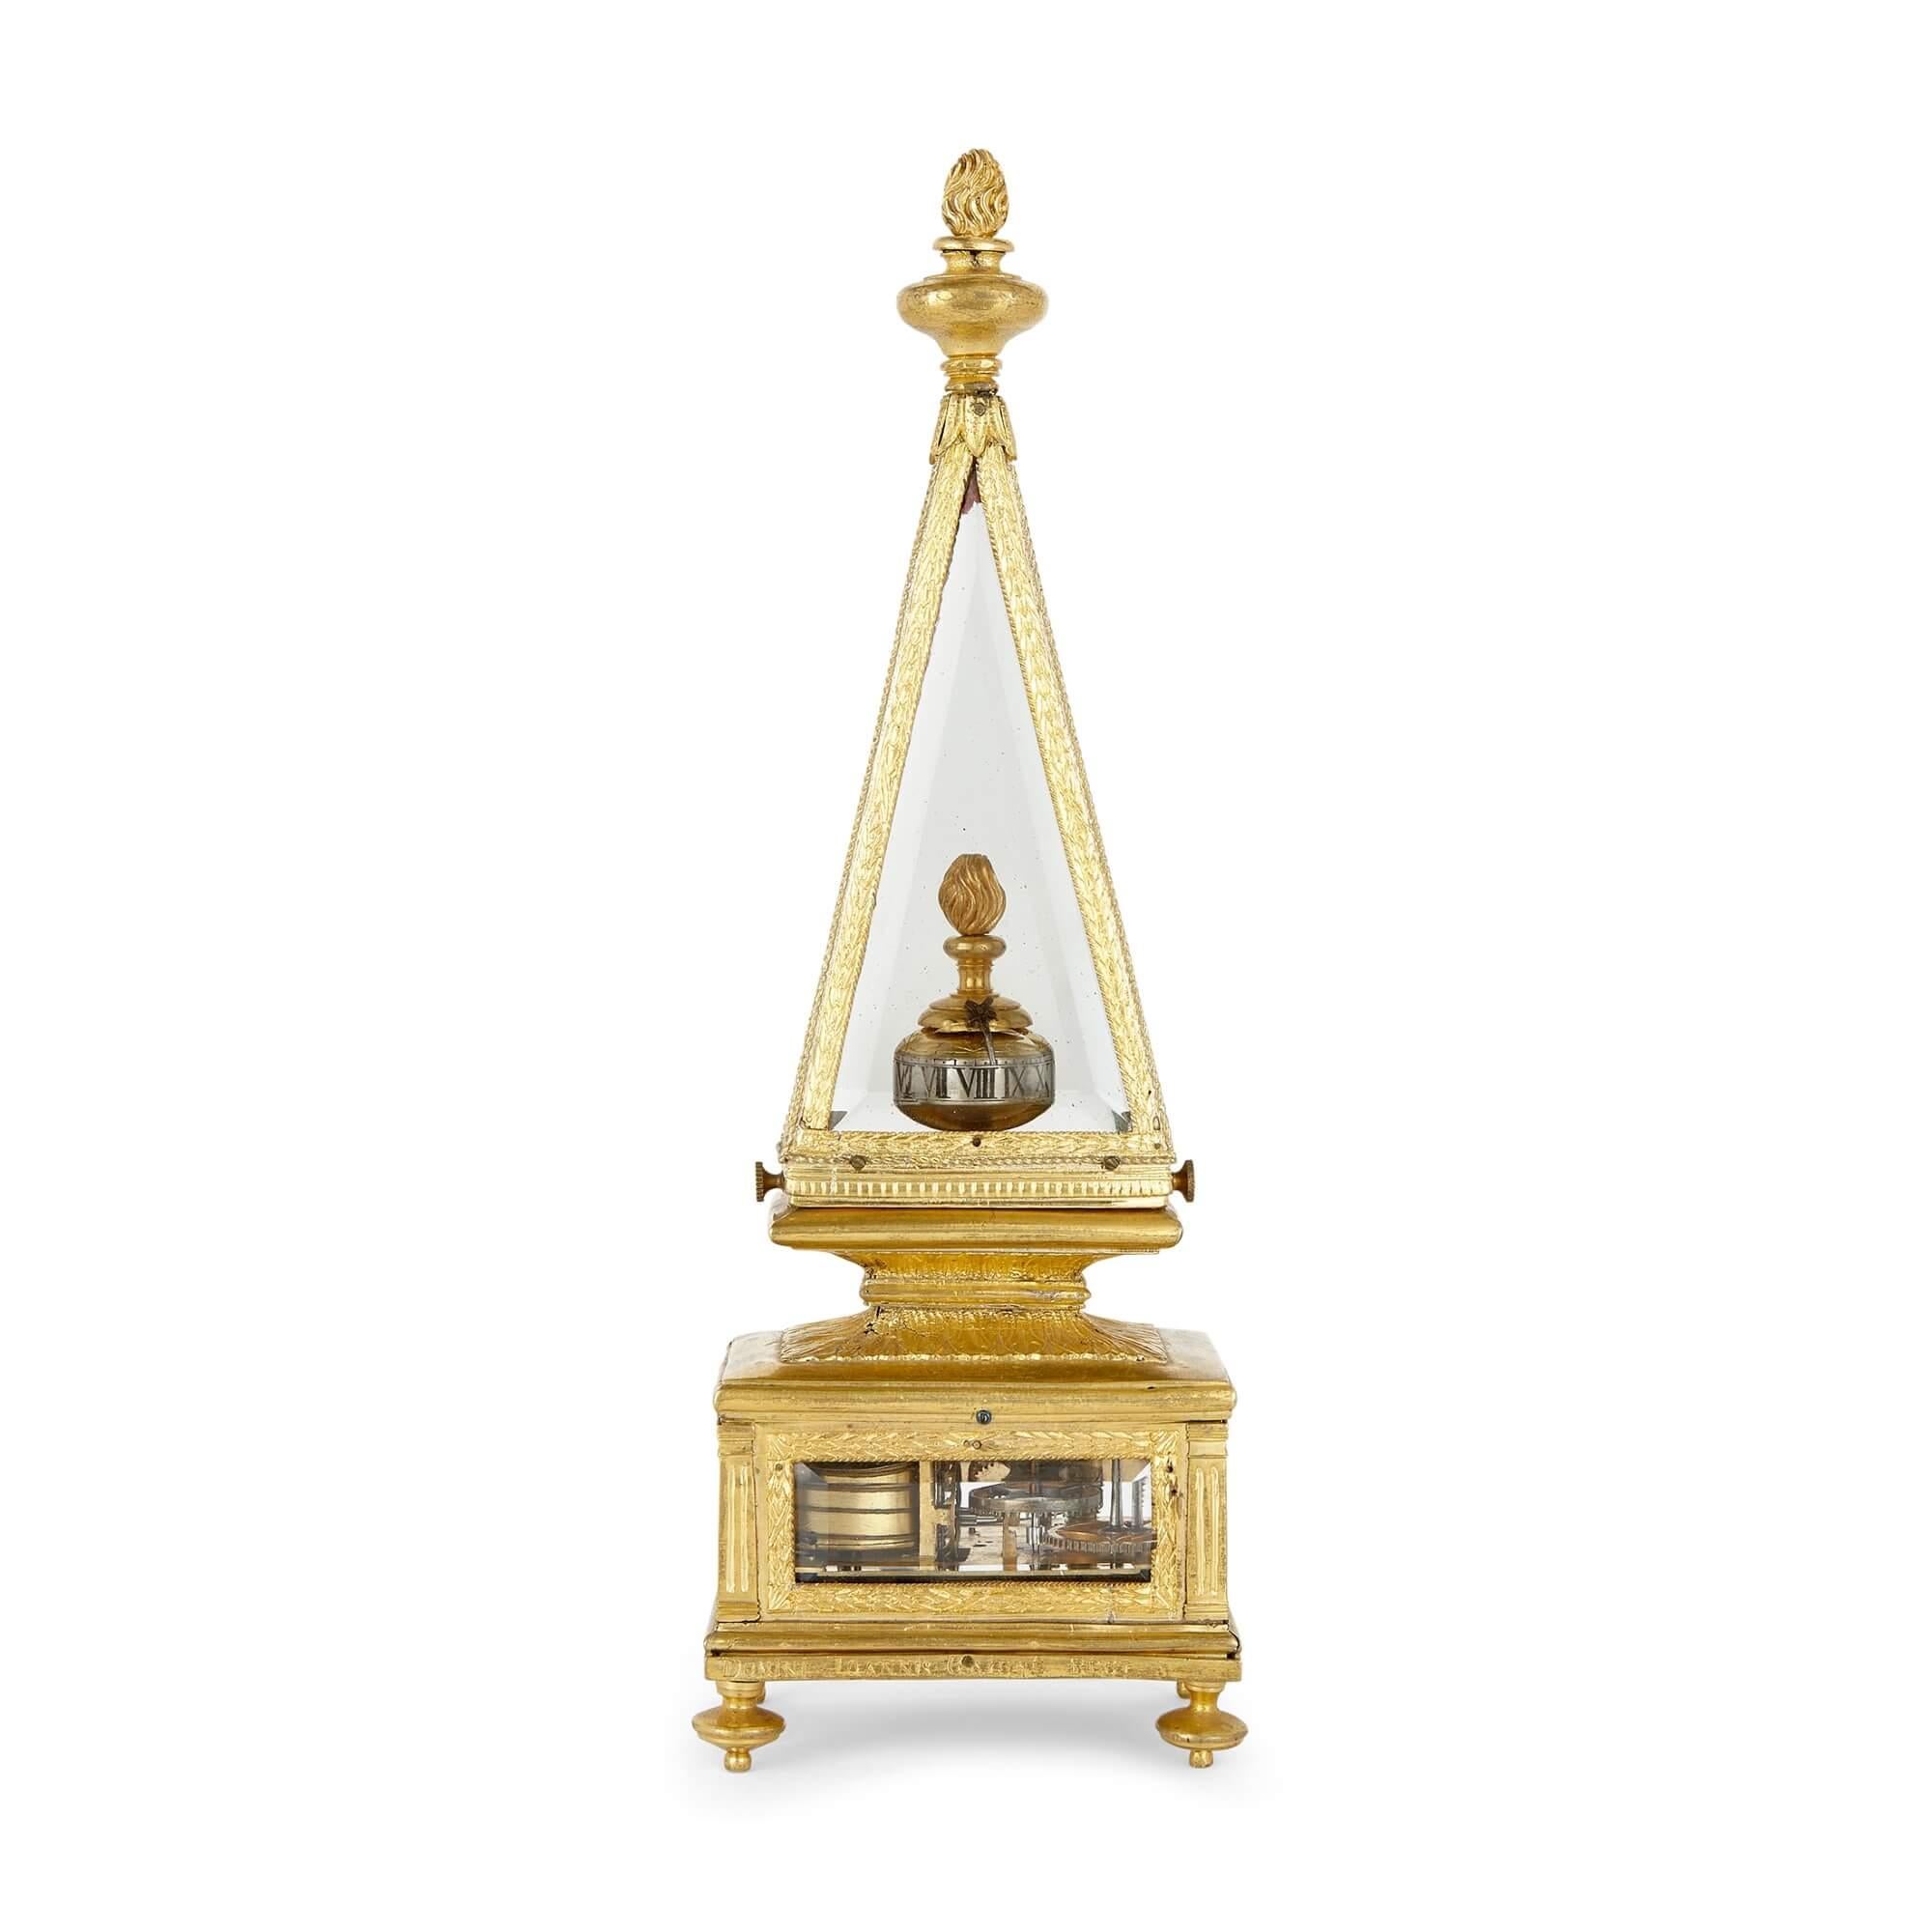 17th Century obelisk-shaped table clock
Italian, 17th Century
Height 28cm, width 9cm, depth 7cm

A stunning piece from the 17th century, this table clock is a precious element of horological artistry and mechanical innovation. Encased in gilt and